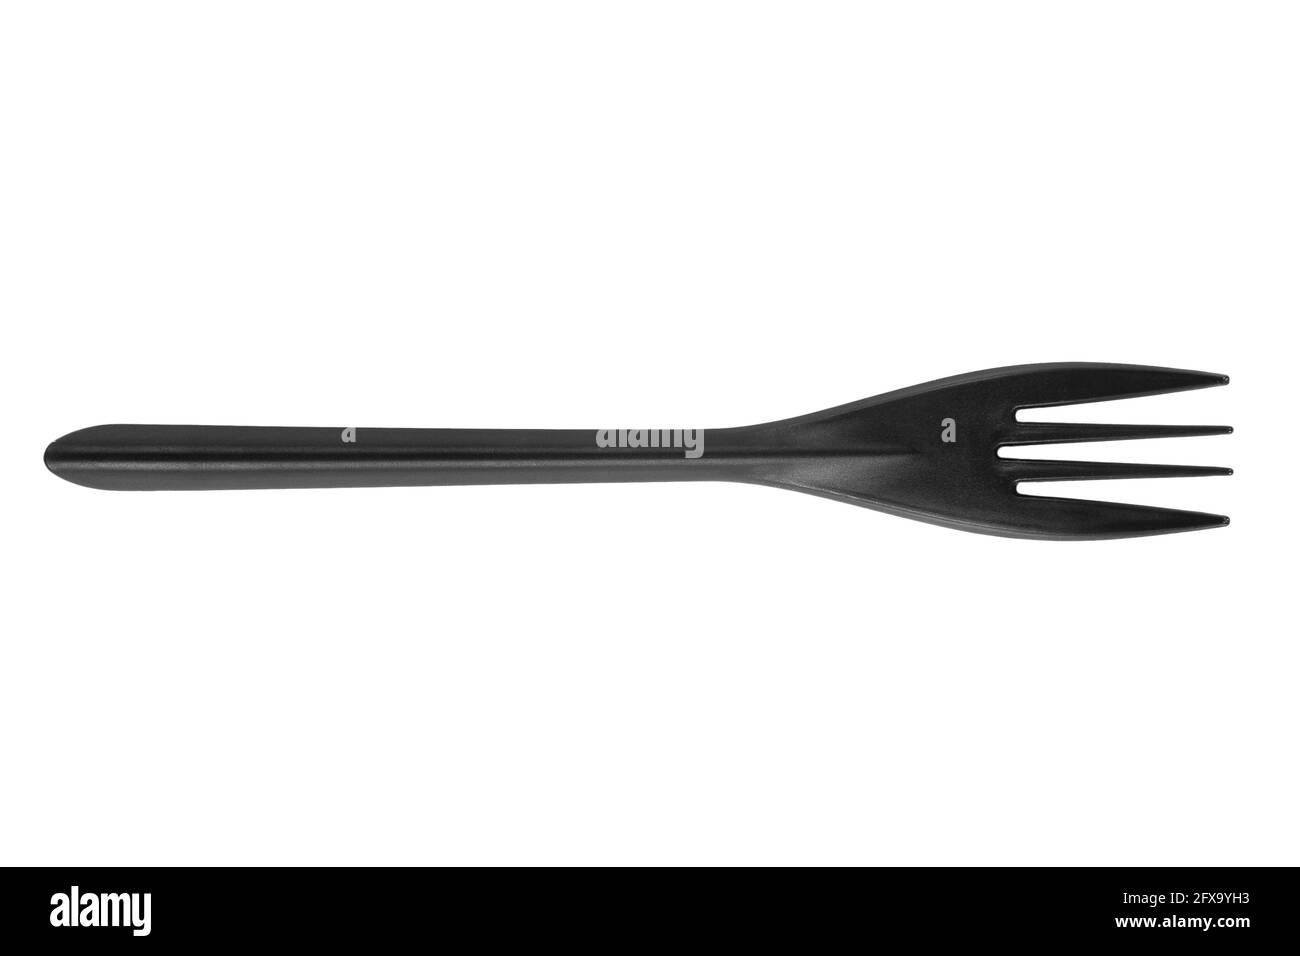 Black plastic fork isolated on white background. Disposable tableware set isolated with clipping path. Stock Photo